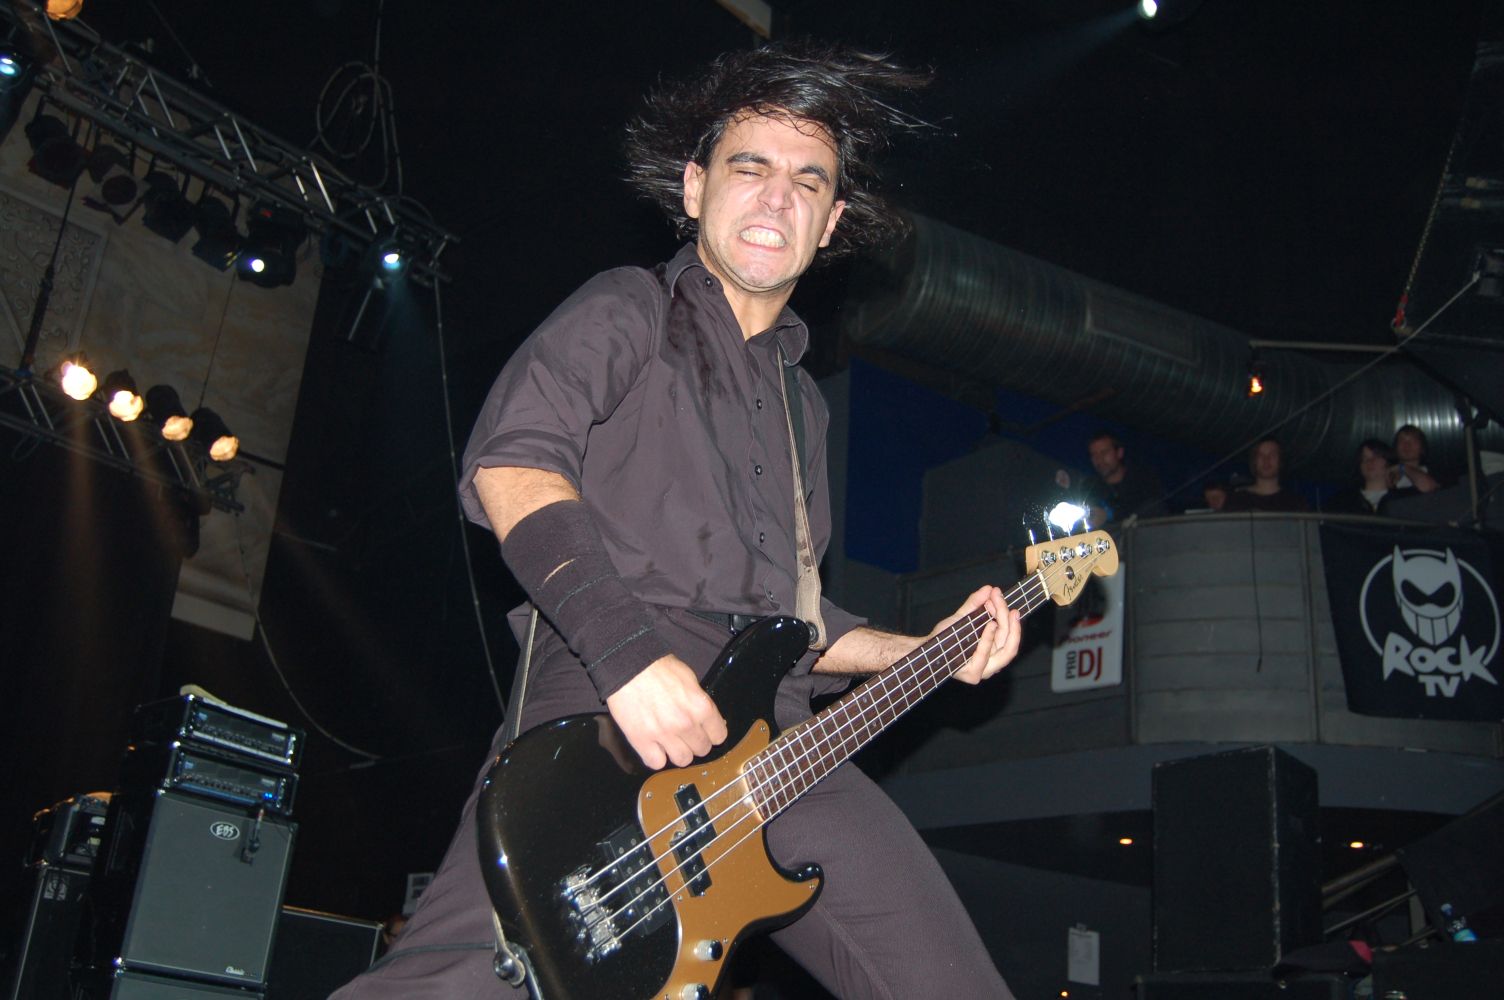 a man in an all black outfit plays a bass guitar